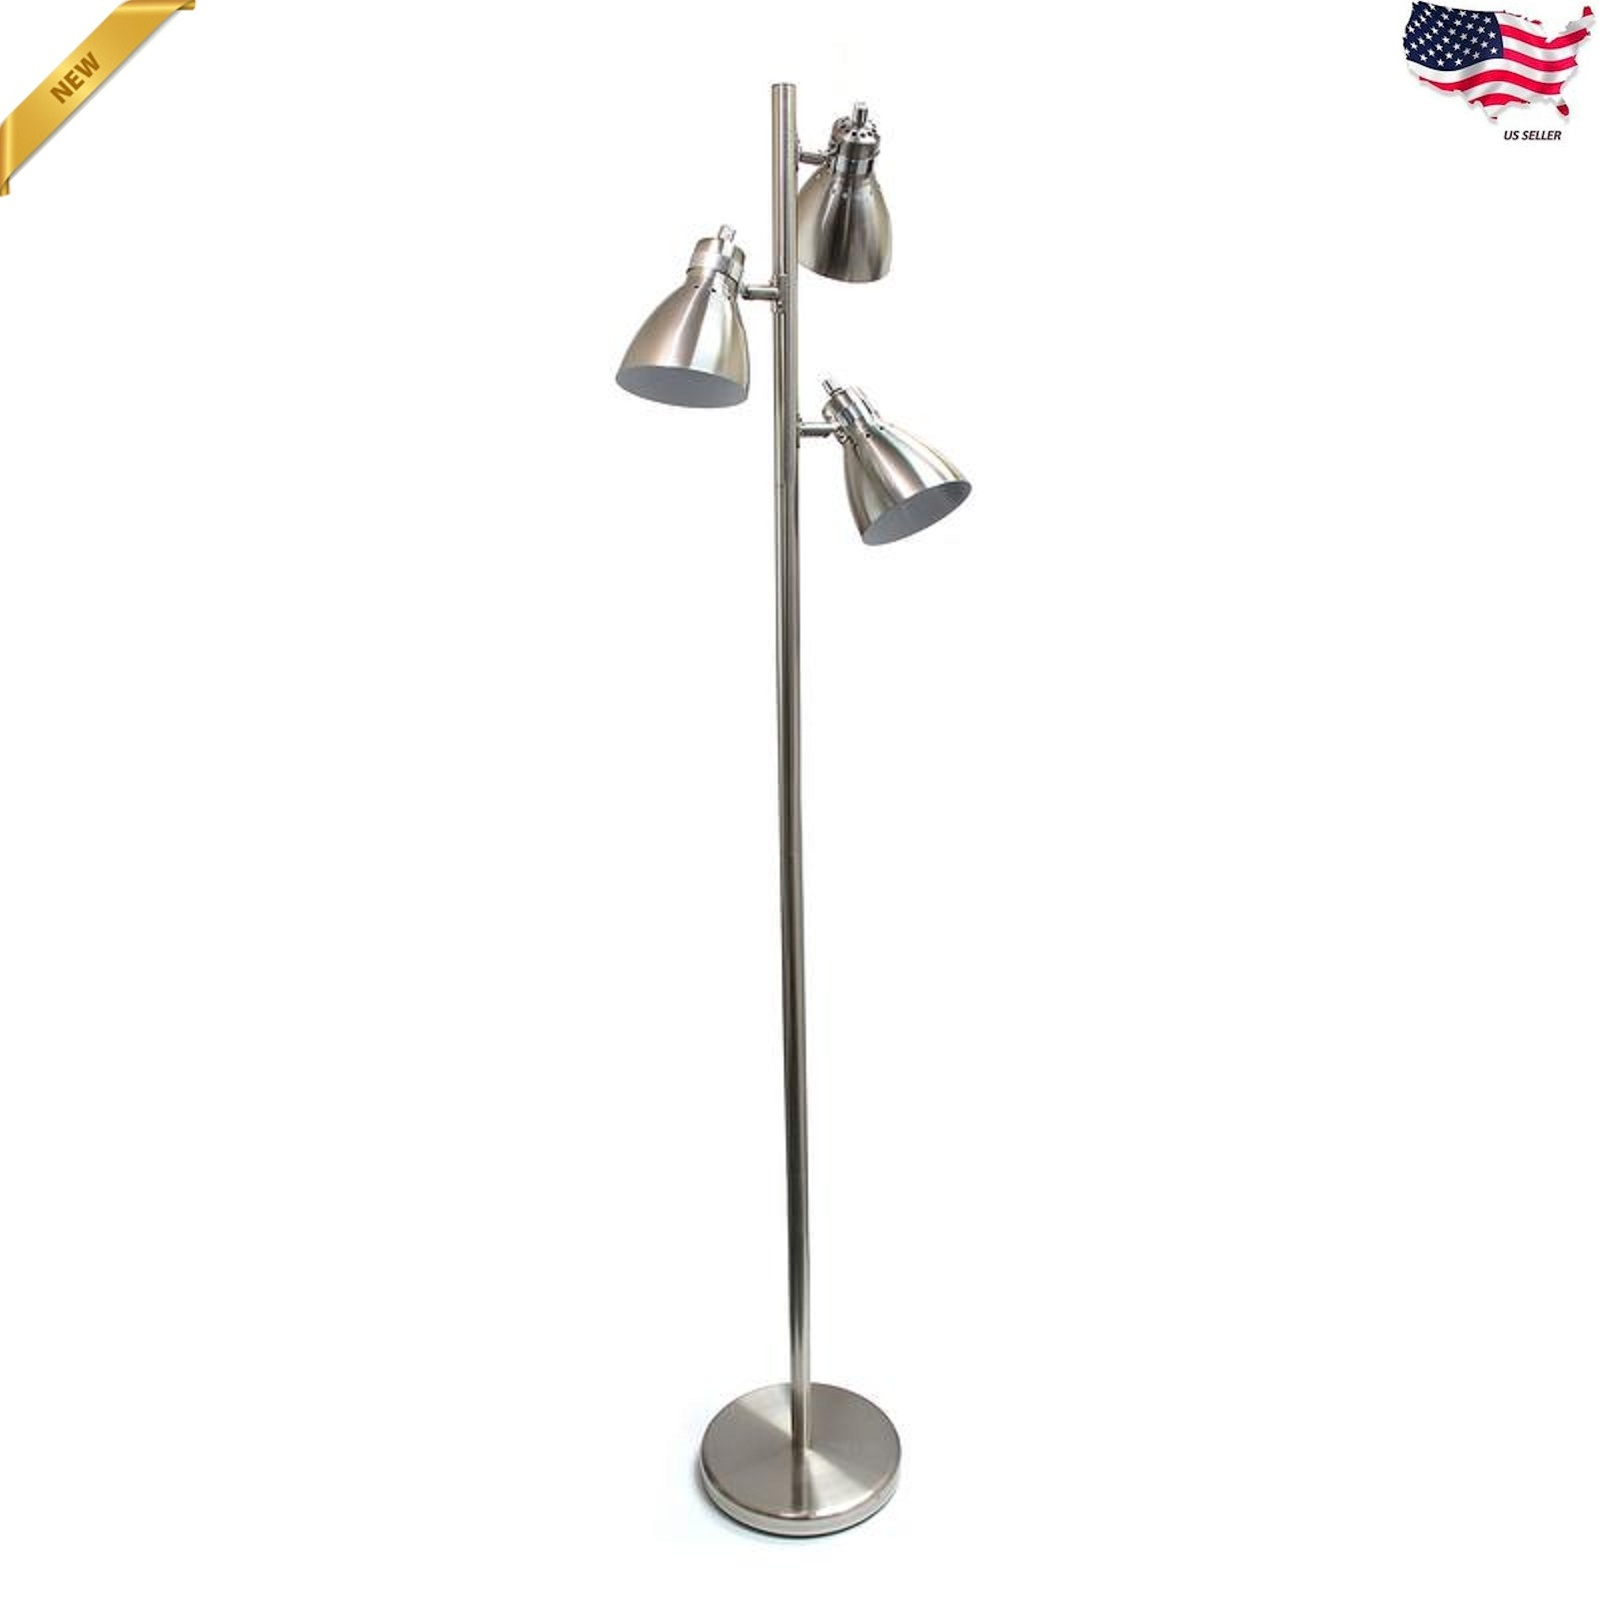 Details About 3 Light Tree Floor Lamp Pole Luxury Home Metal intended for size 1600 X 1600